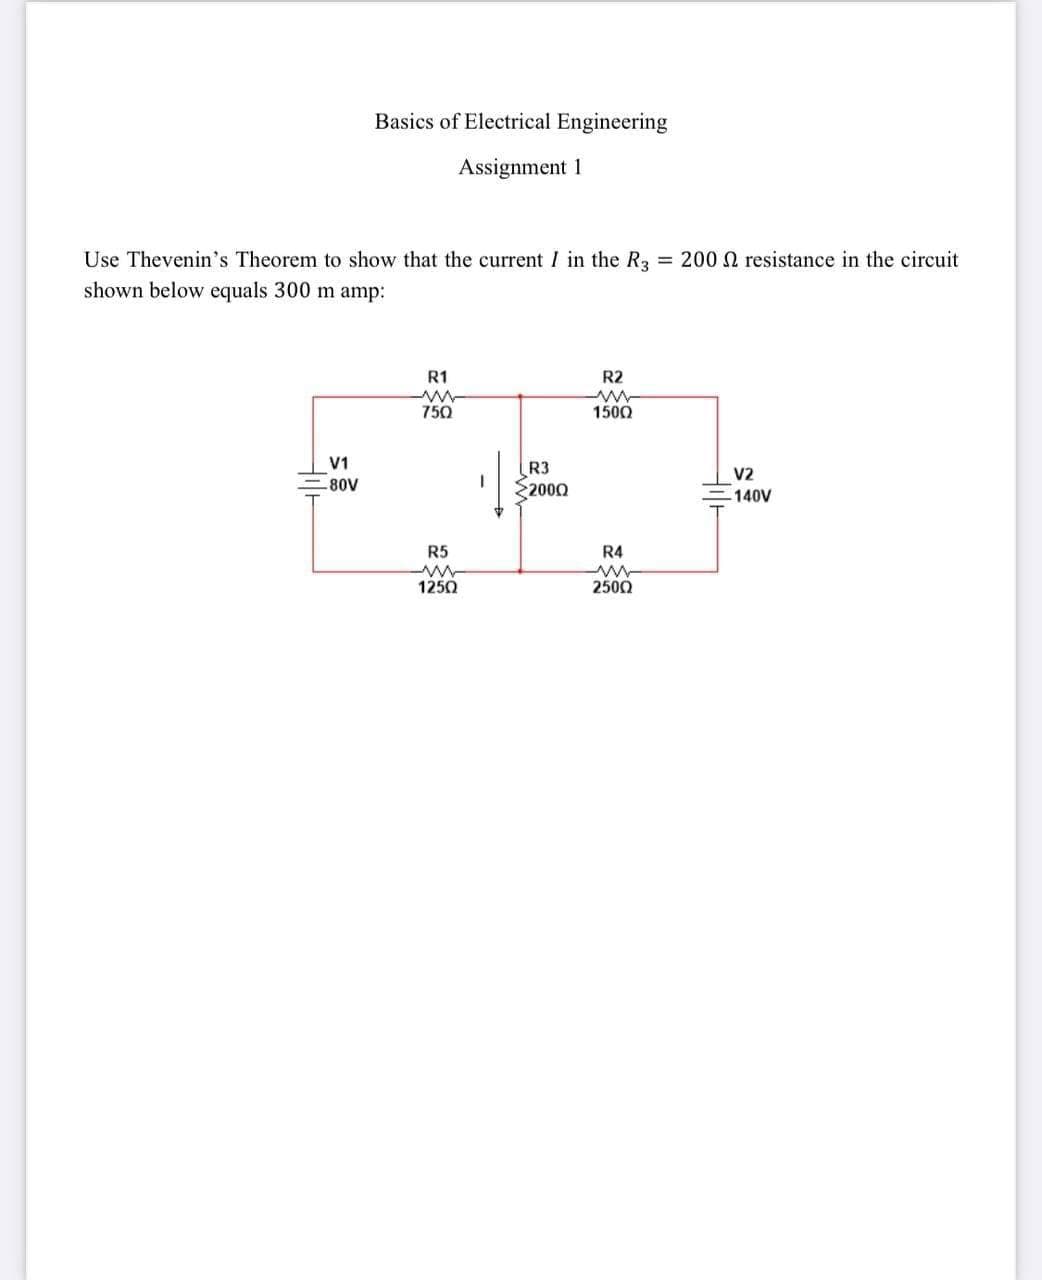 Basics of Electrical Engineering
Assignment 1
Use Thevenin's Theorem to show that the current I in the R3 = 200 N resistance in the circuit
shown below equals 300 m amp:
R1
R2
750
1500
V1
R3
2000
V2
-80V
140V
R5
R4
1250
2500
